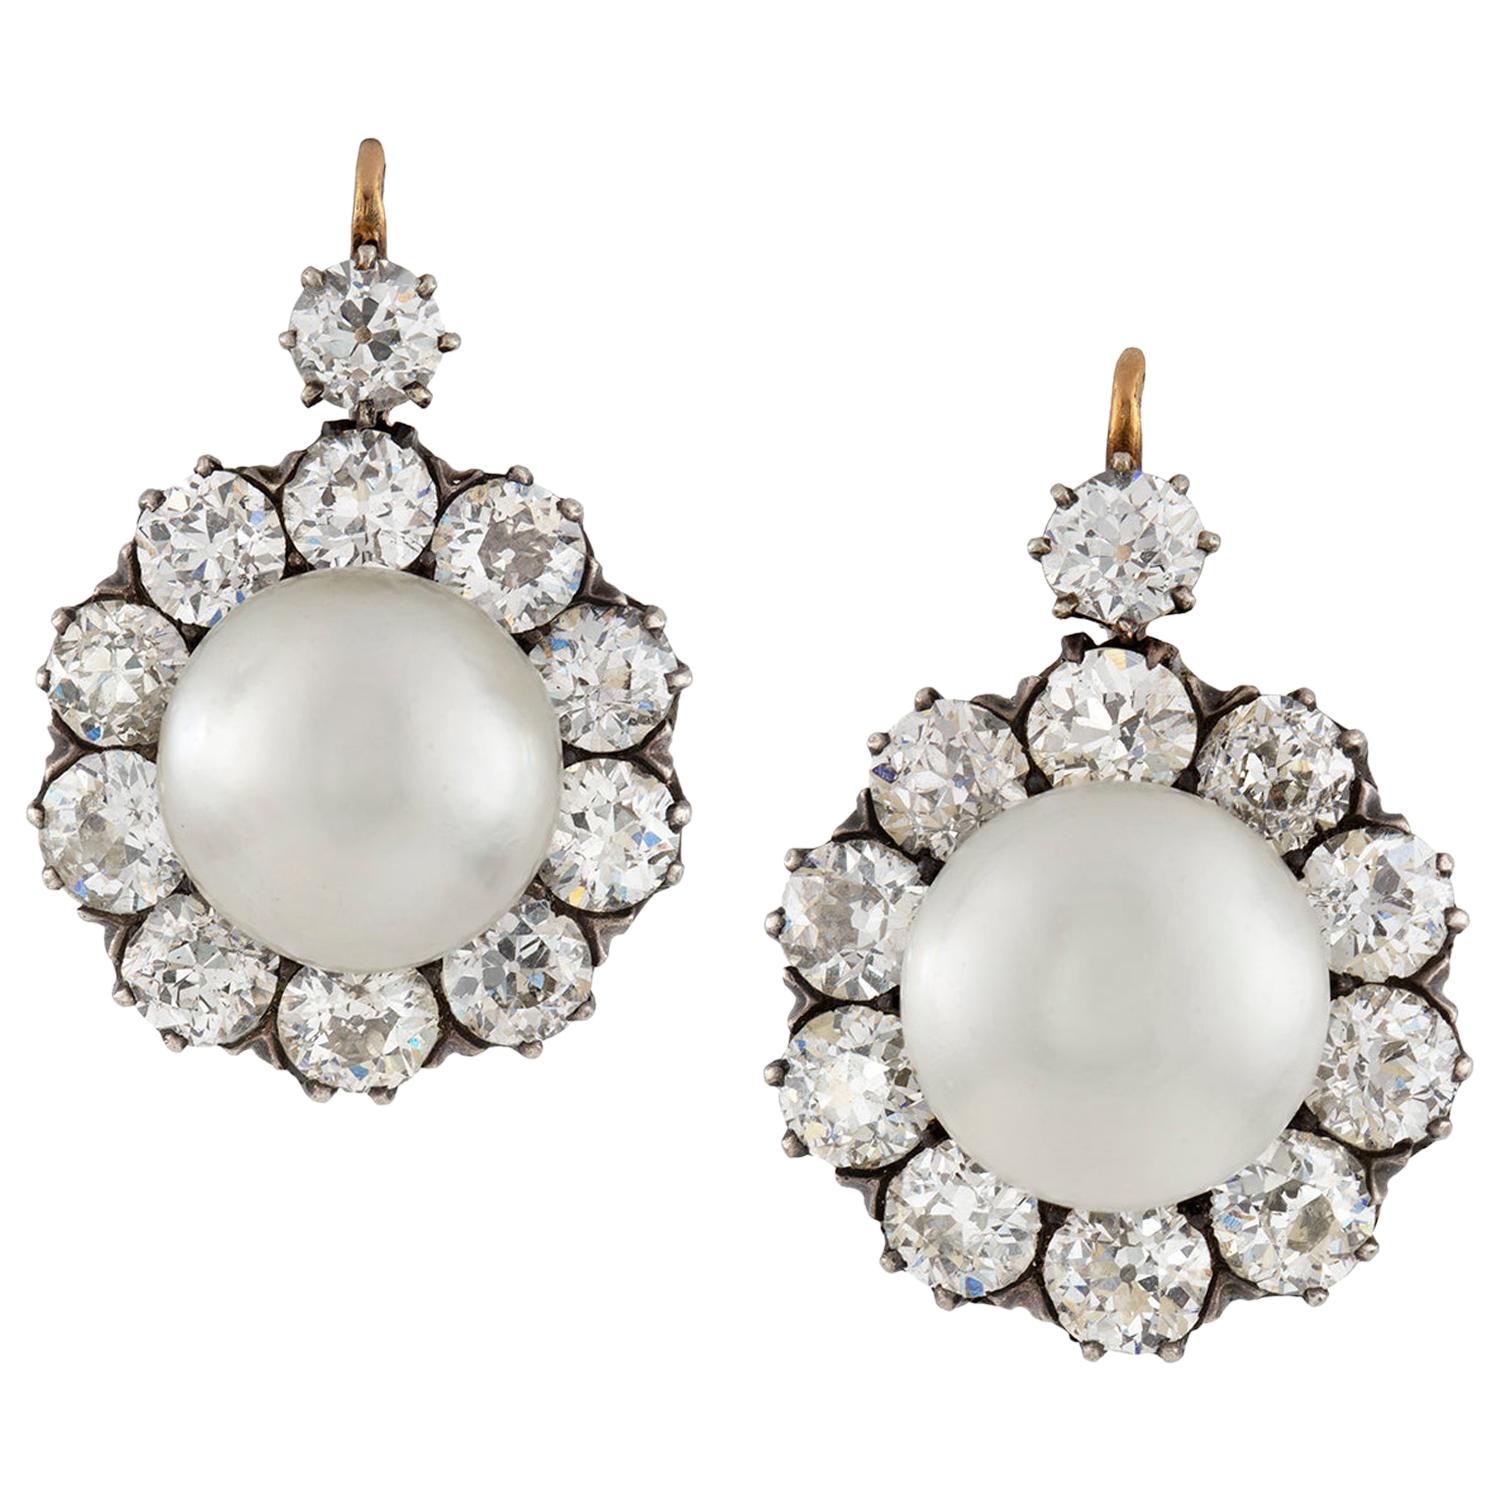 Important Pair of Natural Pearl and Diamond Earrings